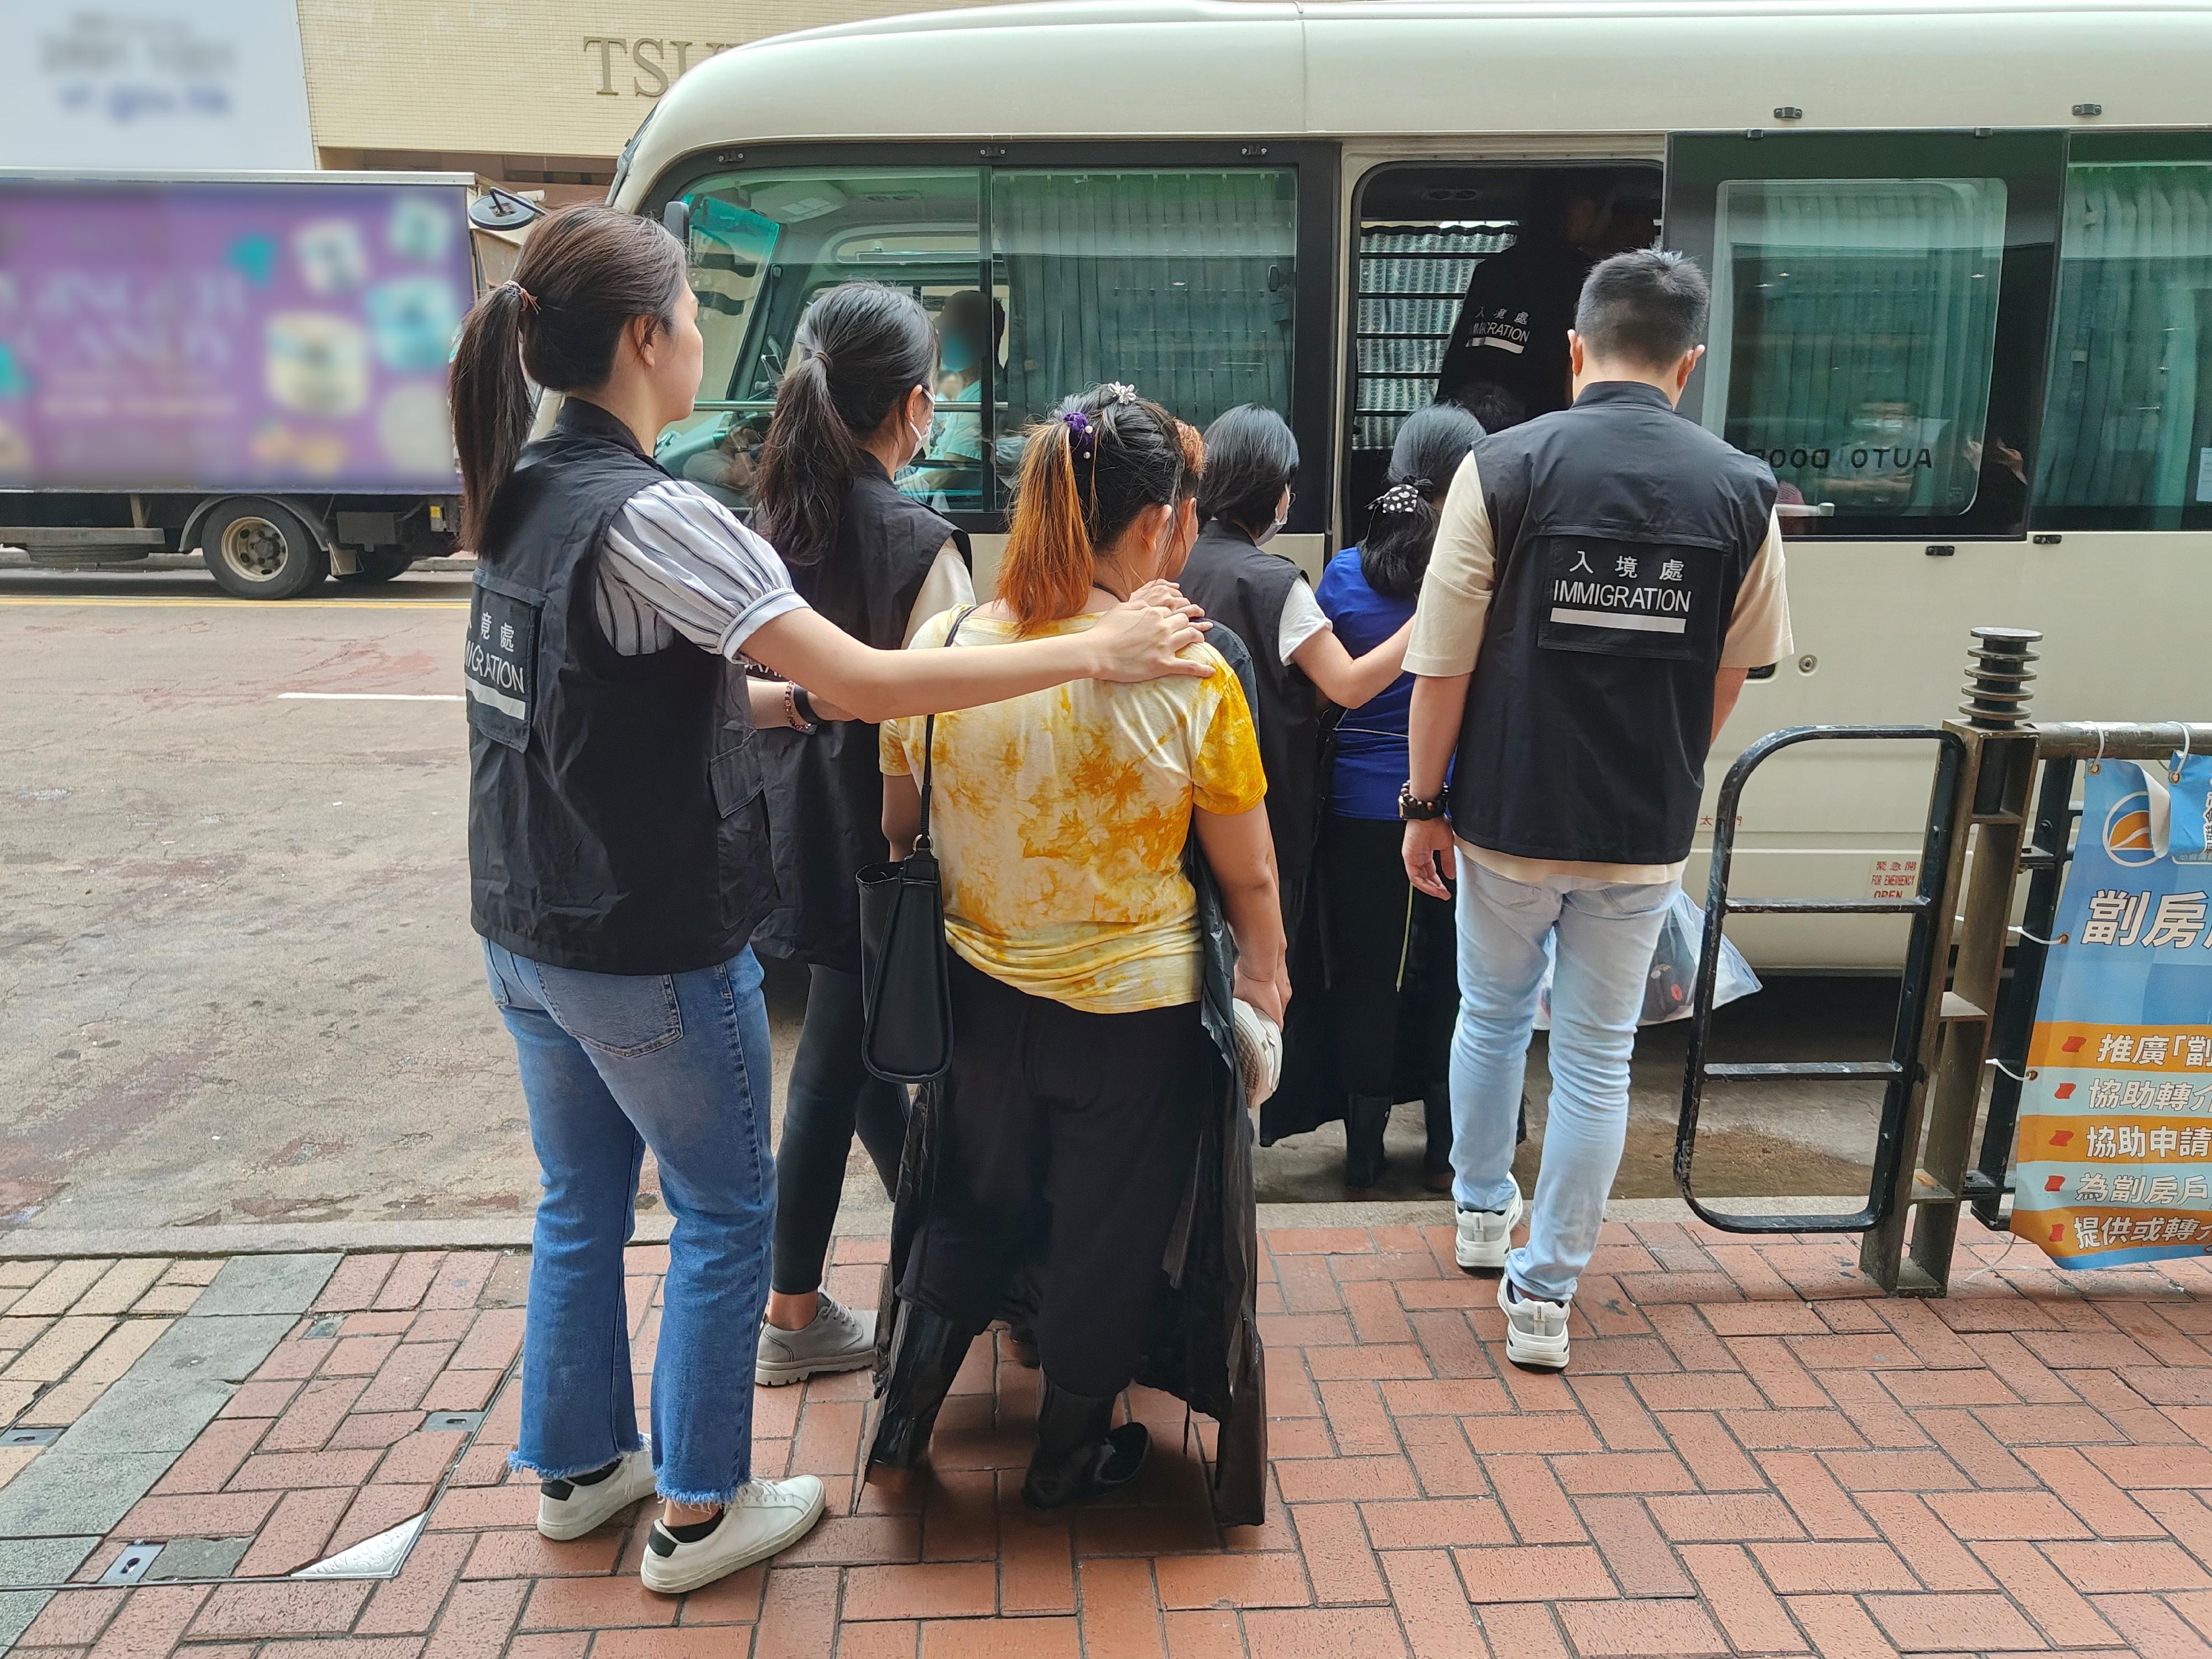 The Immigration Department mounted a series of territory-wide anti-illegal worker operations codenamed "Lightshadow", "Twilight" and a joint operation with the Hong Kong Police Force codenamed "Windsand" for four consecutive days from May 15 to yesterday (May 18). Photo shows suspected illegal workers arrested during an operation.